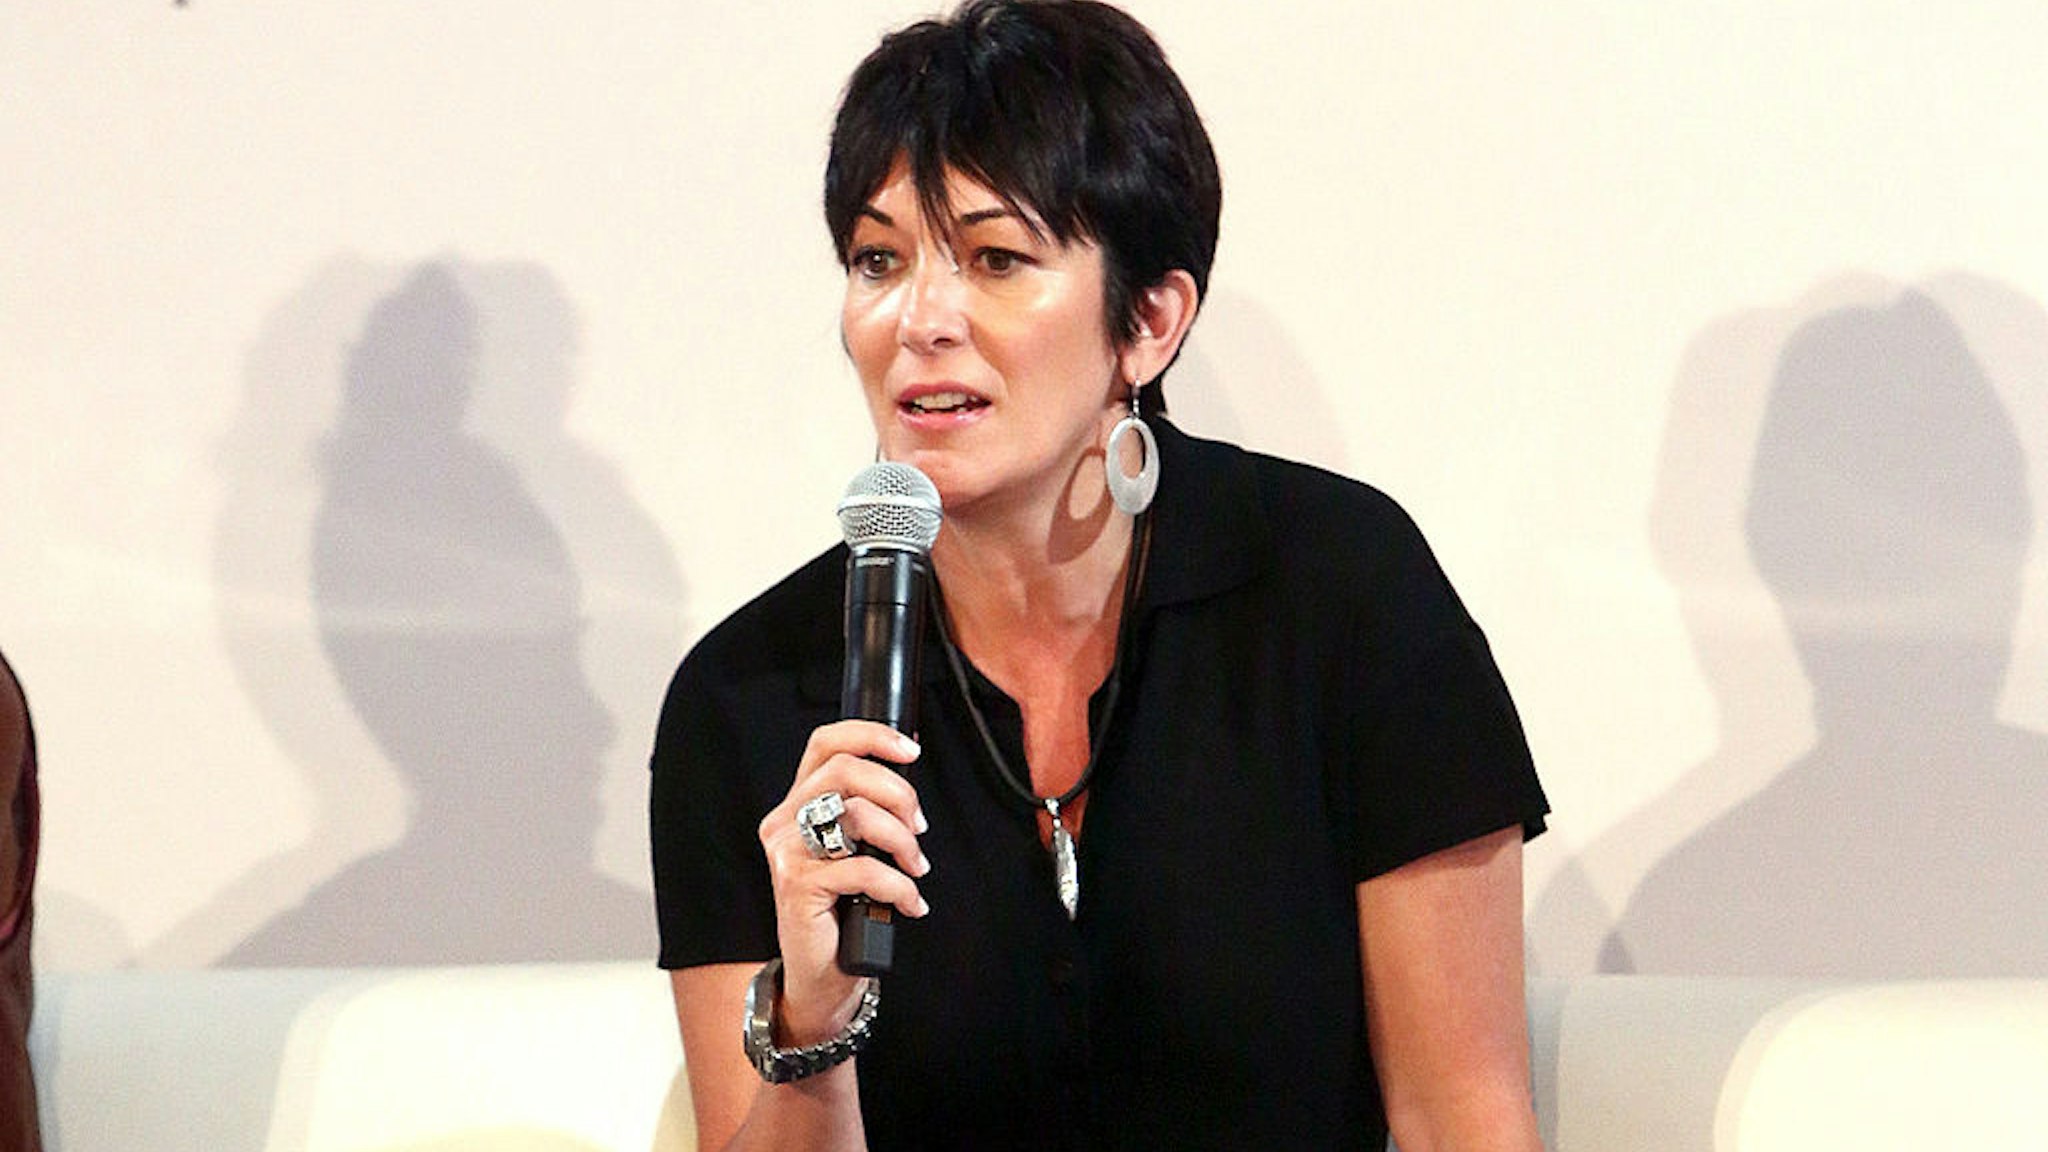 Founder, Terrama Ghislaine Maxwell attends the 4th Annual WIE Symposium at Center 548 on September 20, 2013 in New York City.